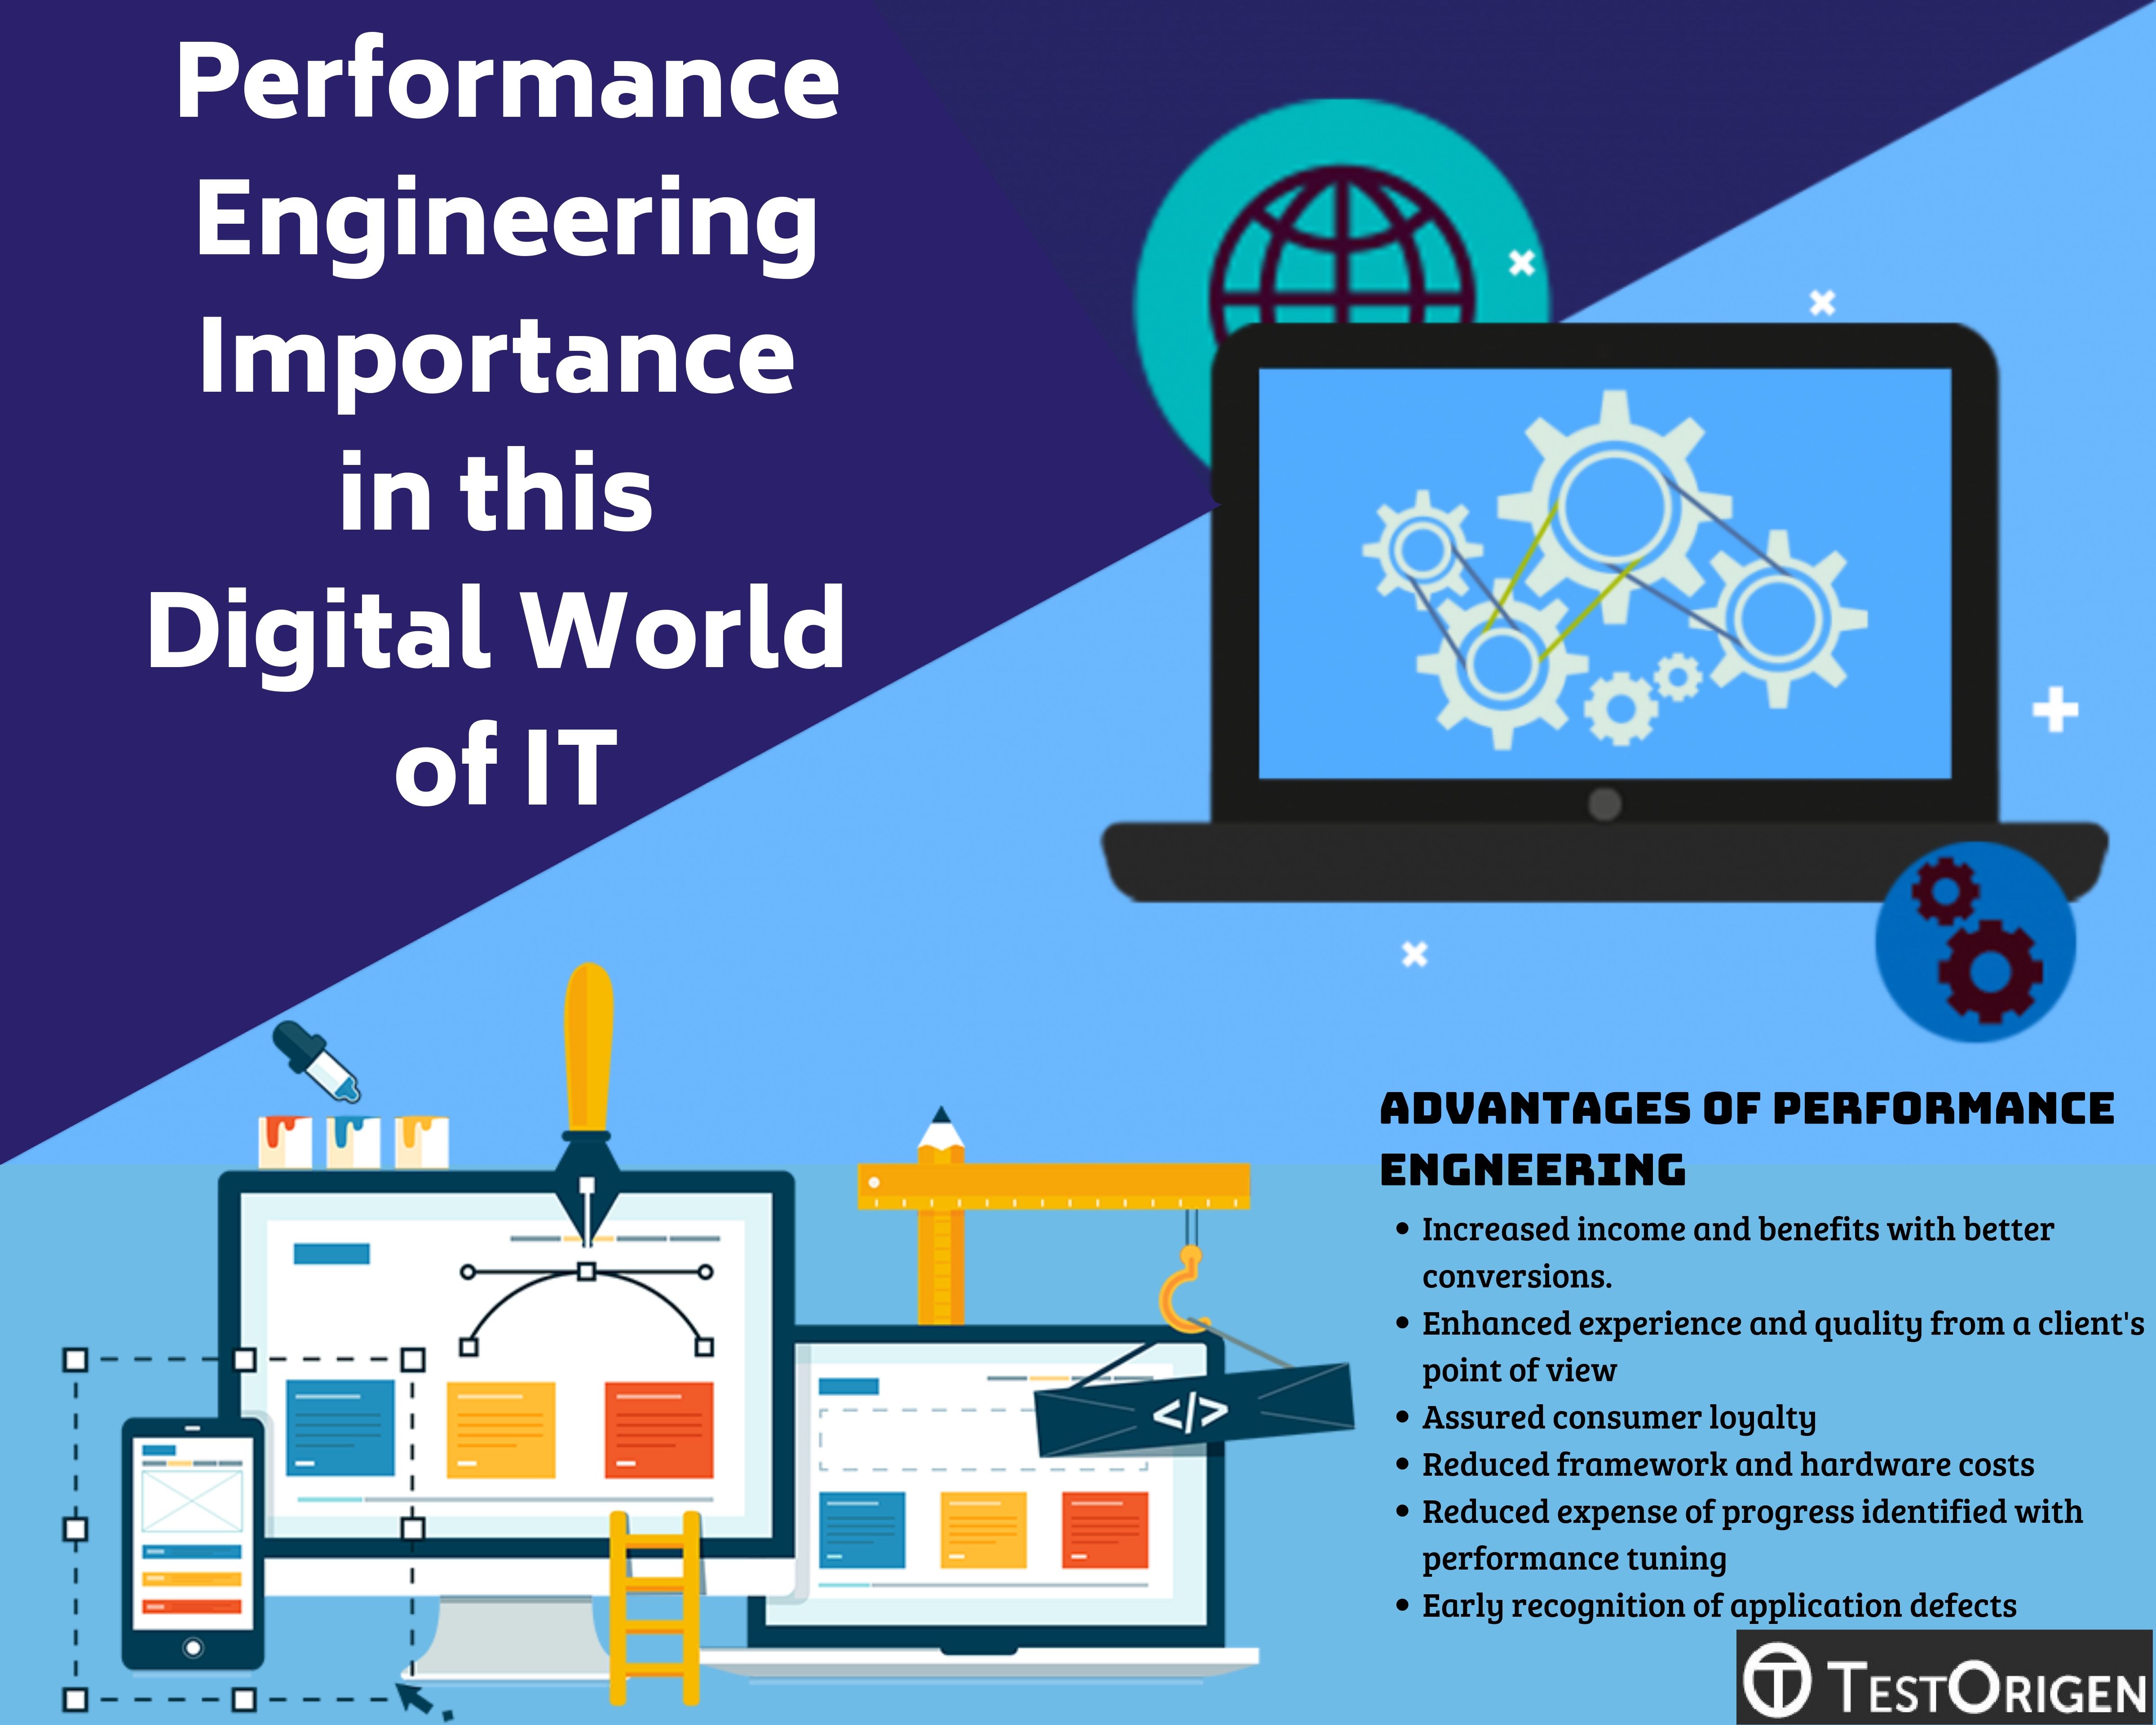 Performance Engineering Importance in this Digital World of IT